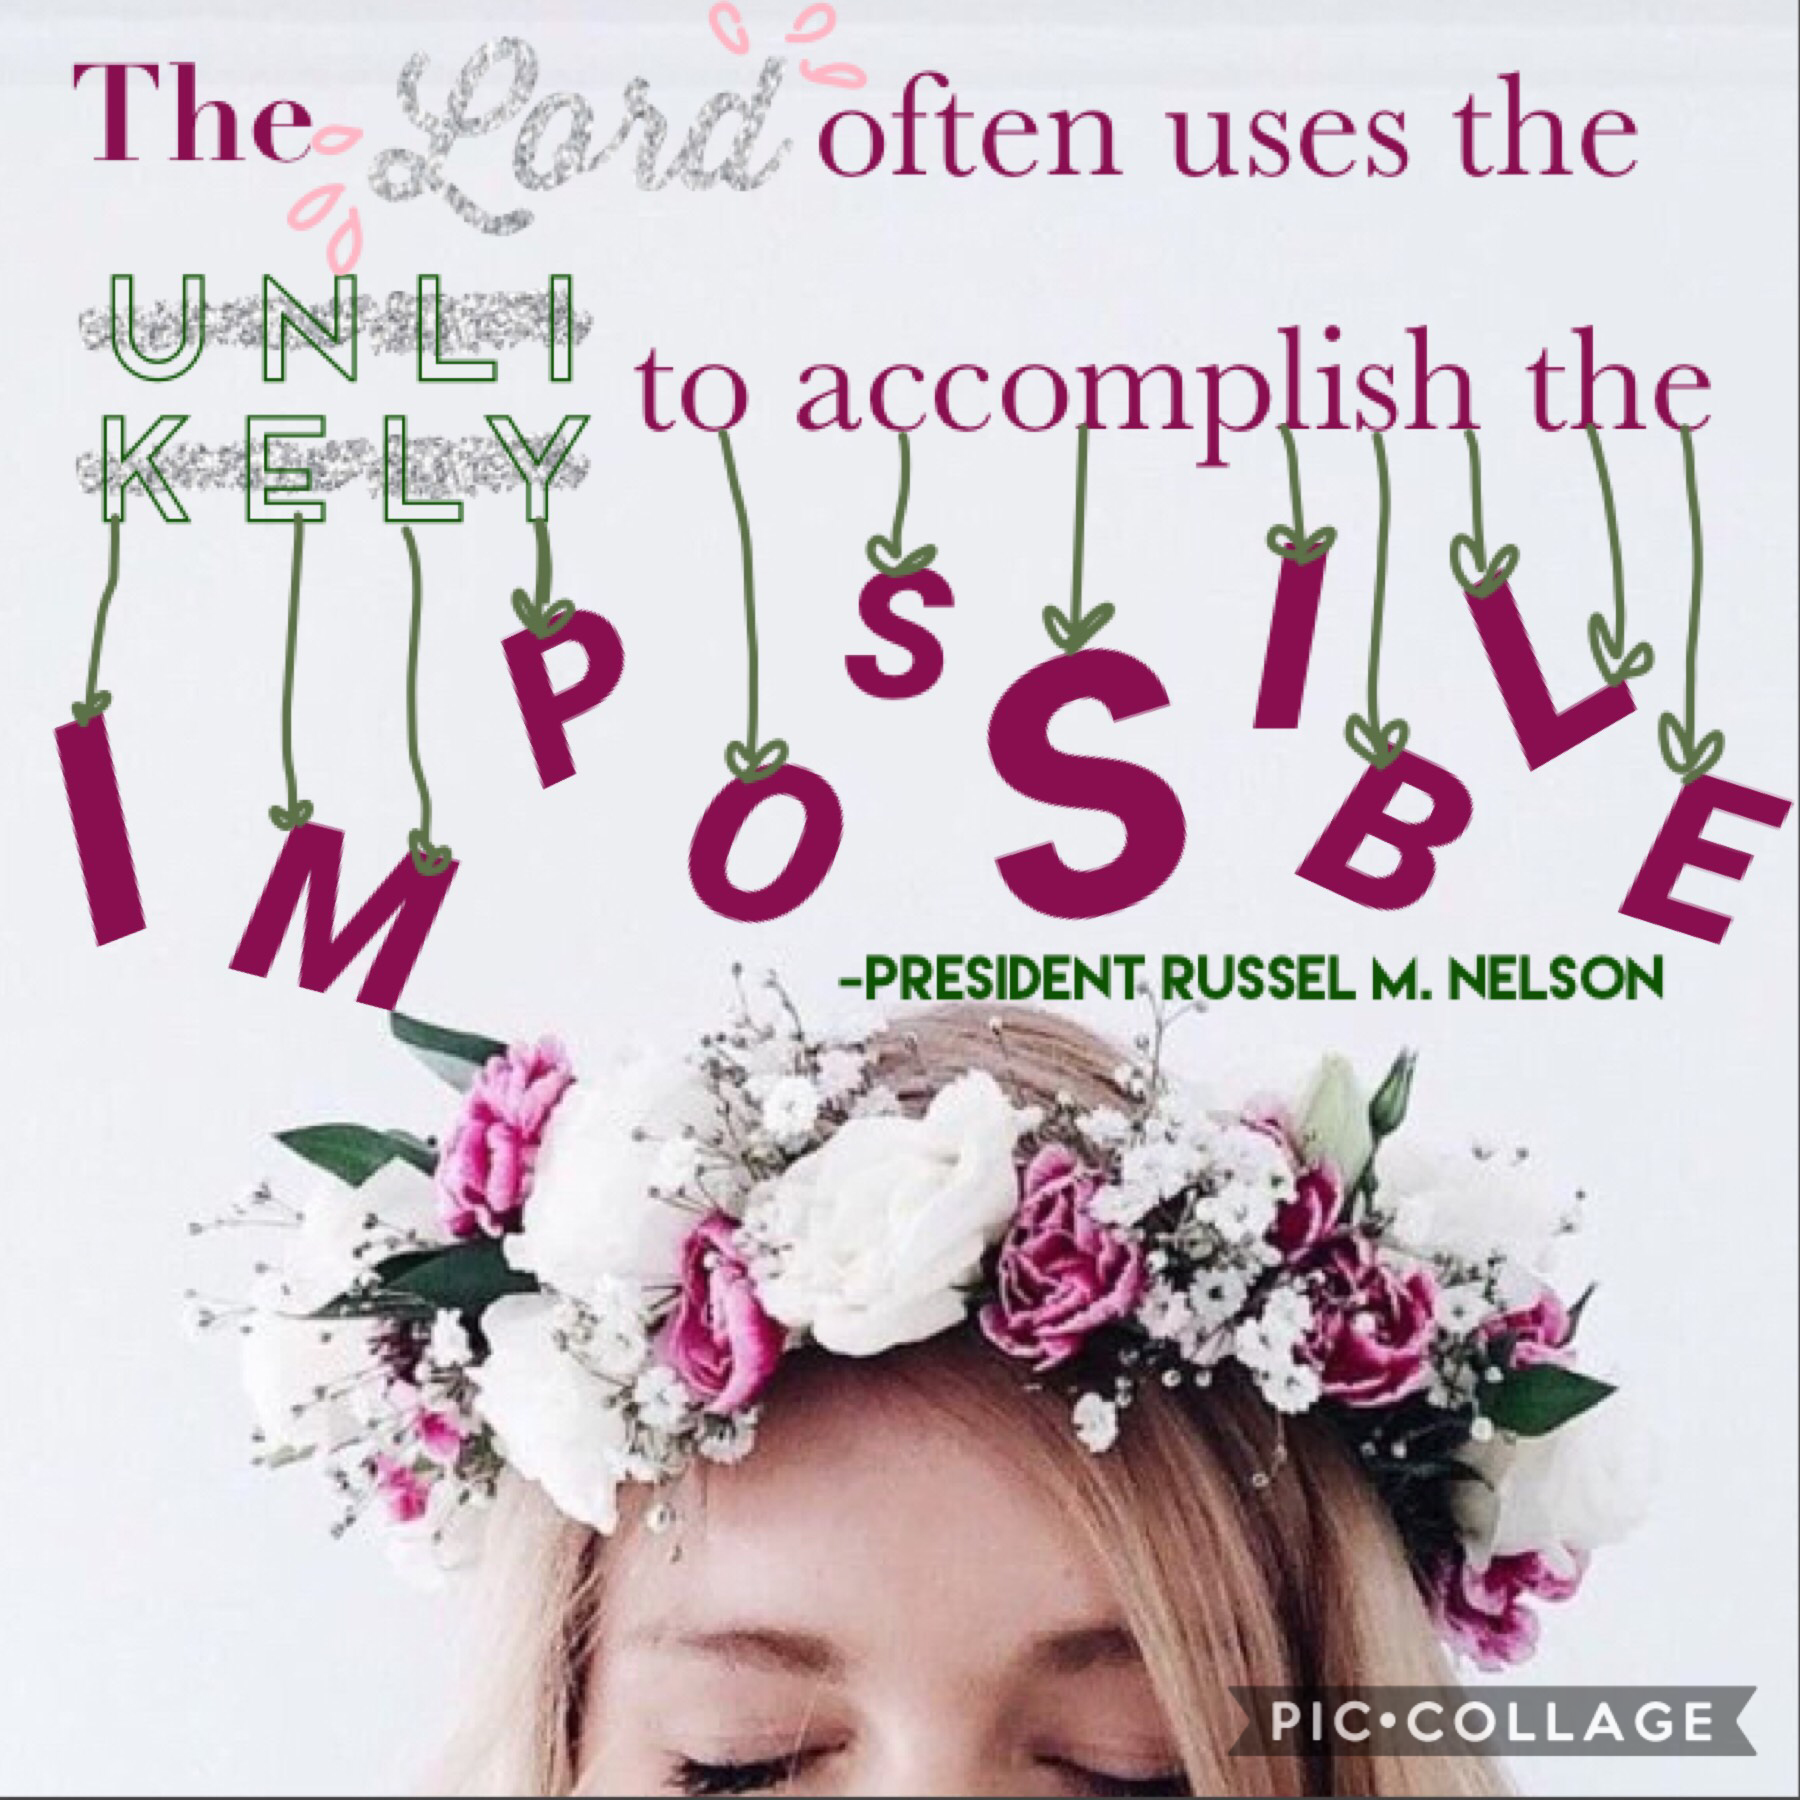 Quote from the prophet of the lds church!!❤️❤️